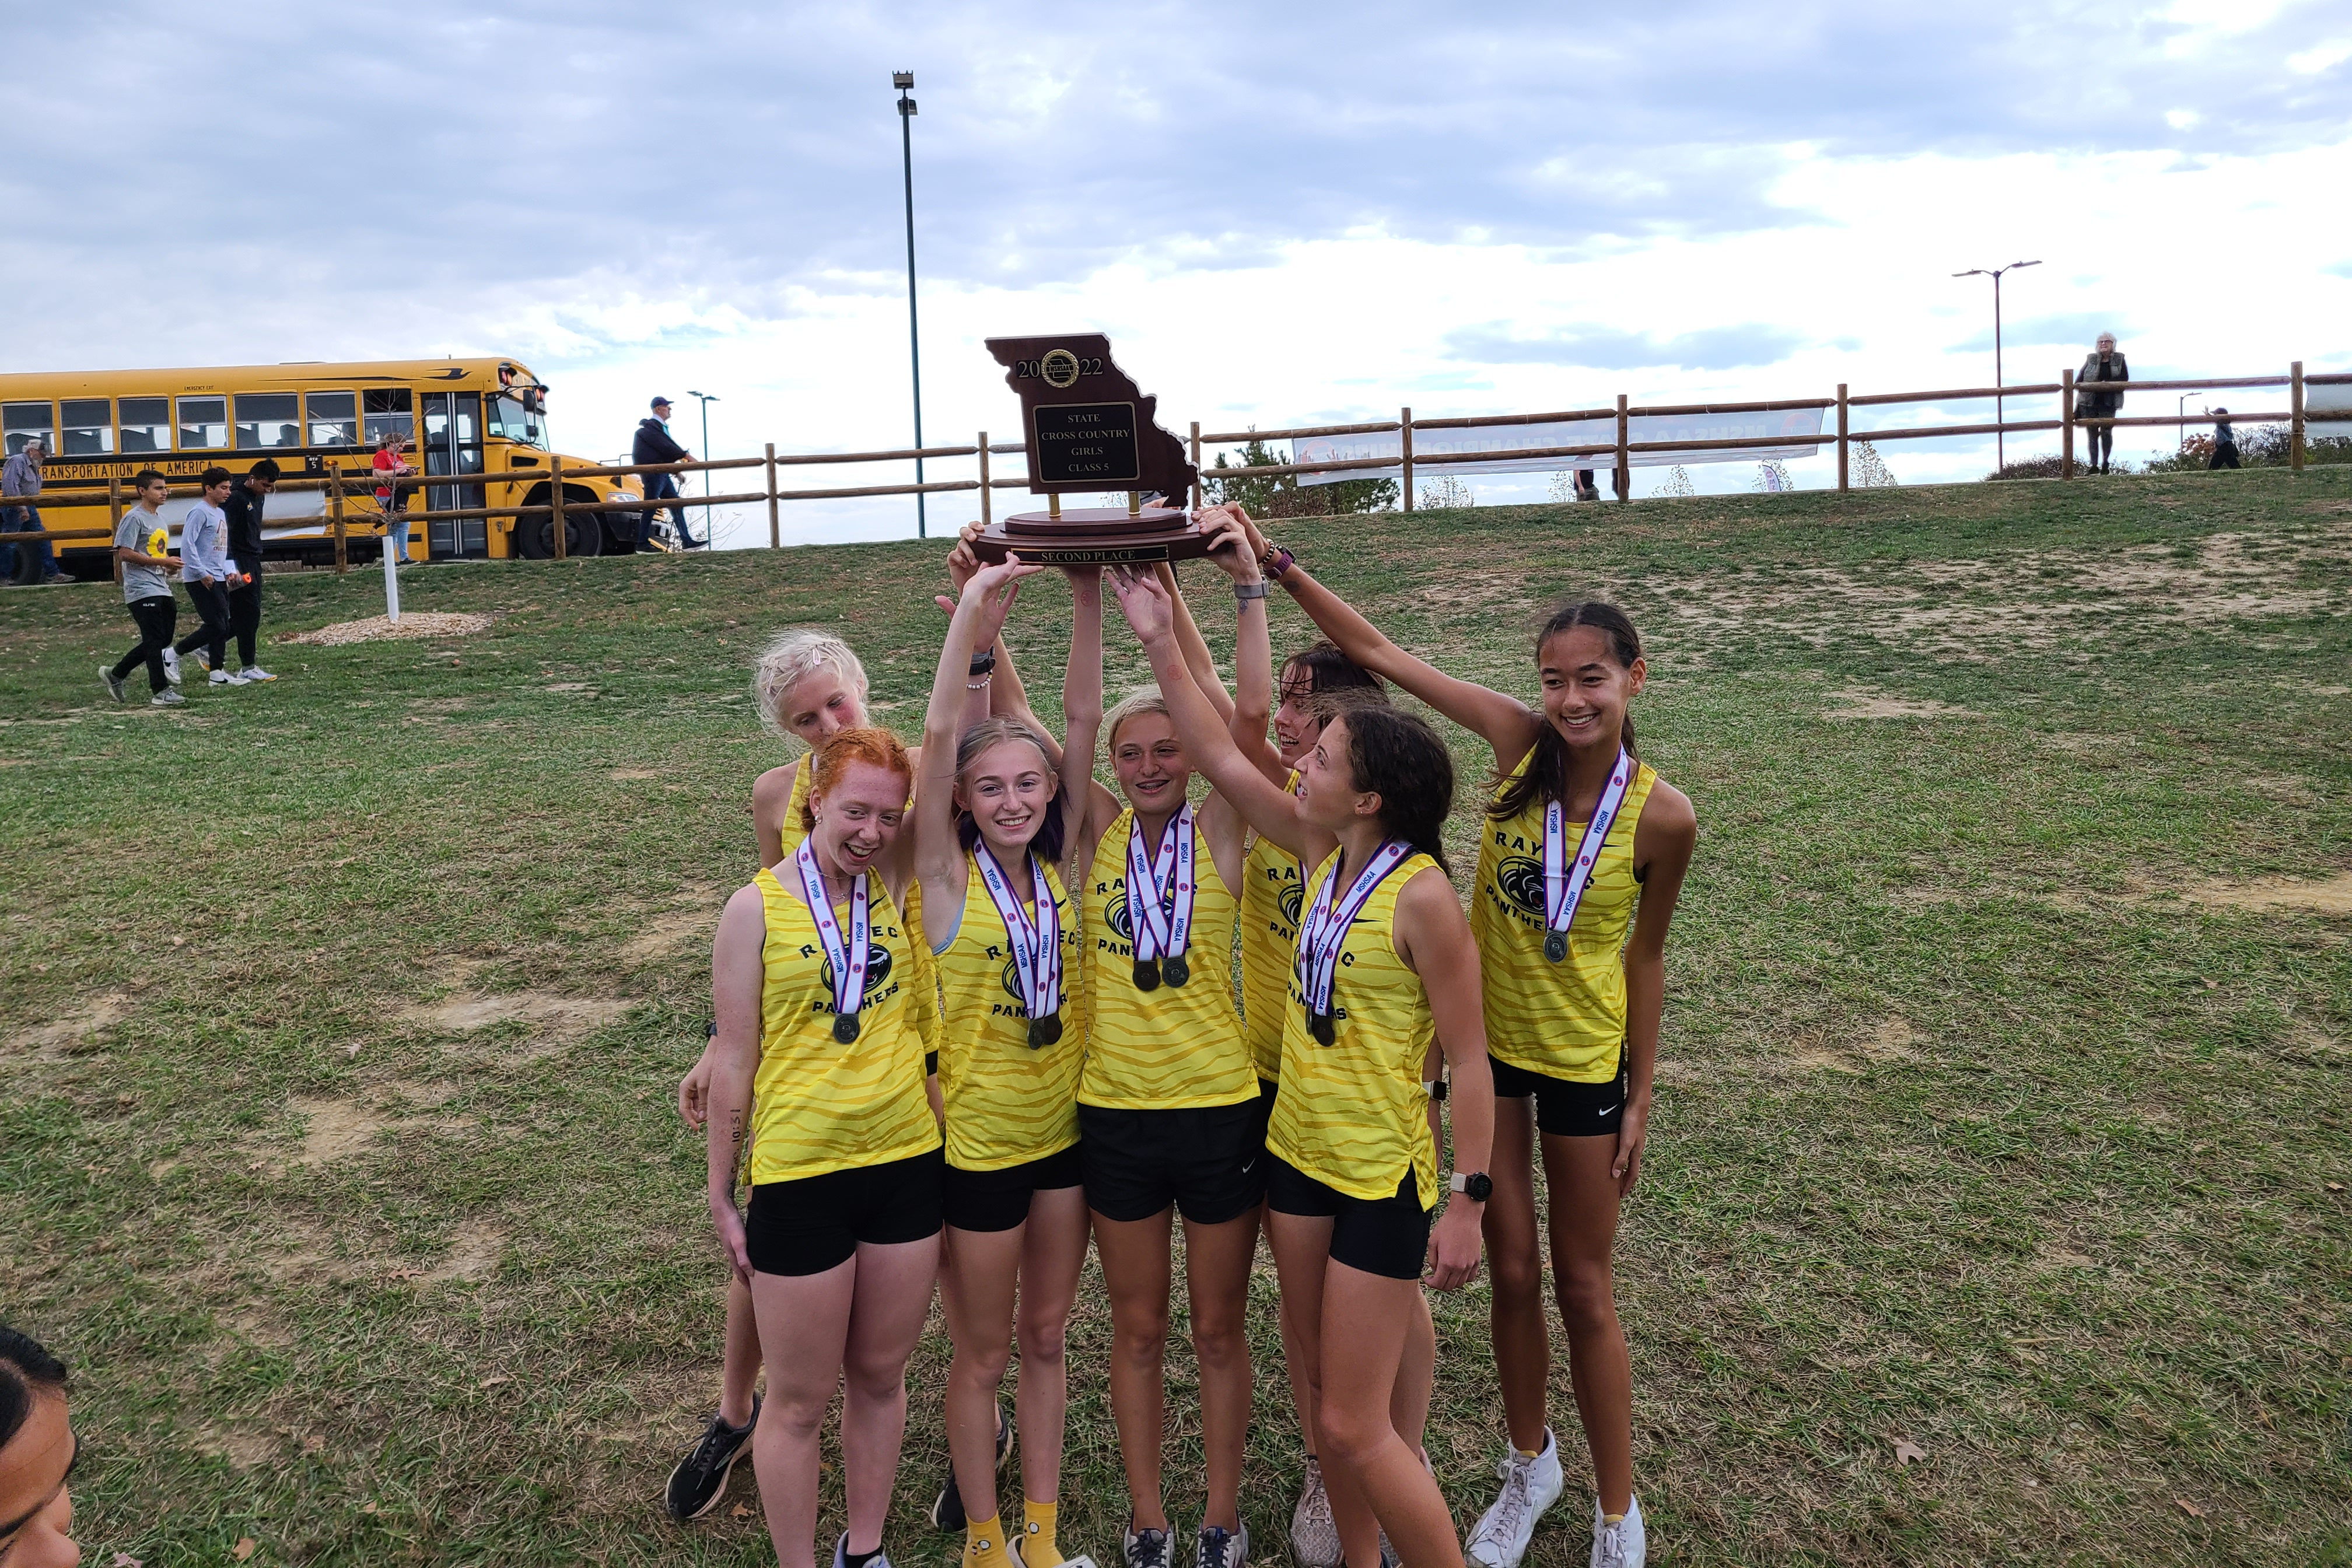 The girls cross country team won 2nd place at state